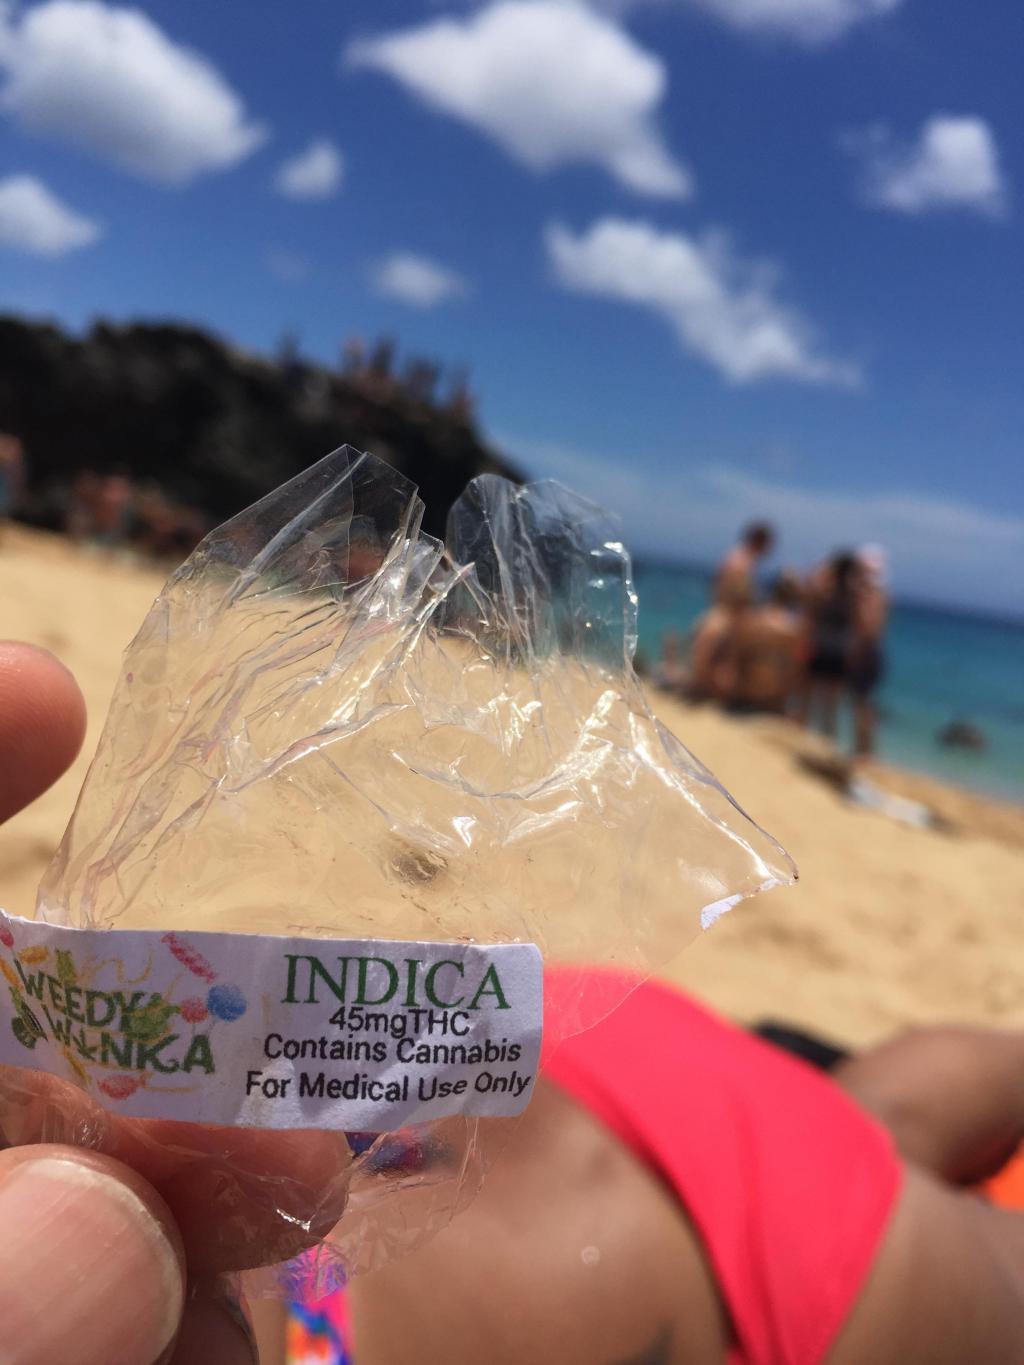 beach - Indica 45mg Thc Ika Contains Cannabis For Medical Use Only